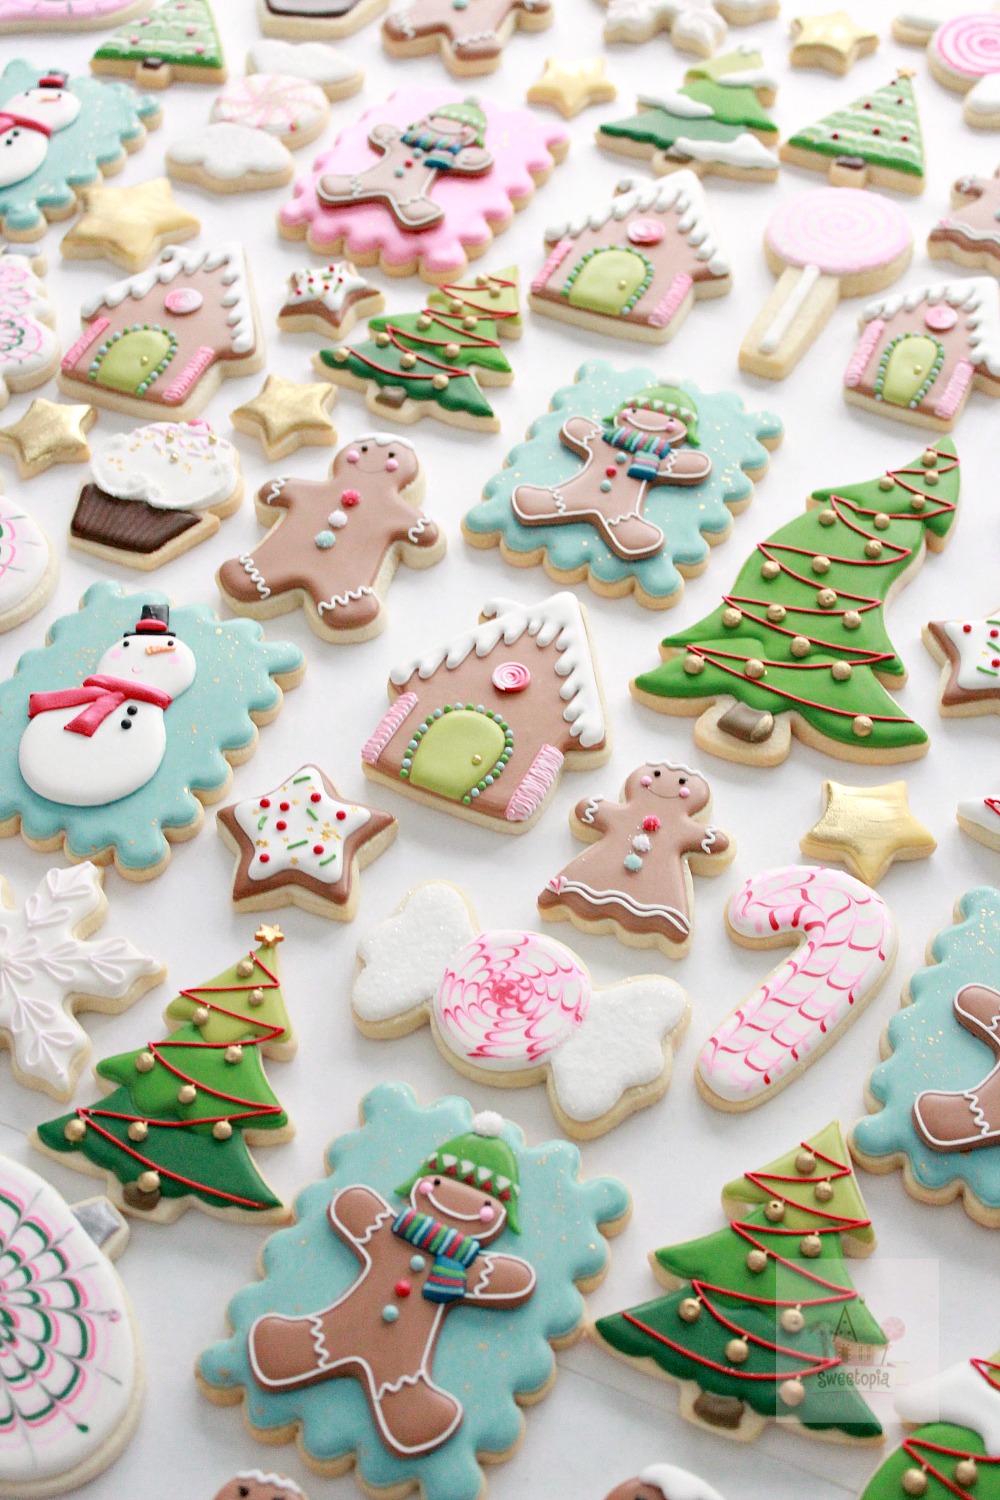 Royal Icing Cookie Decorating Tips | Sweetopia